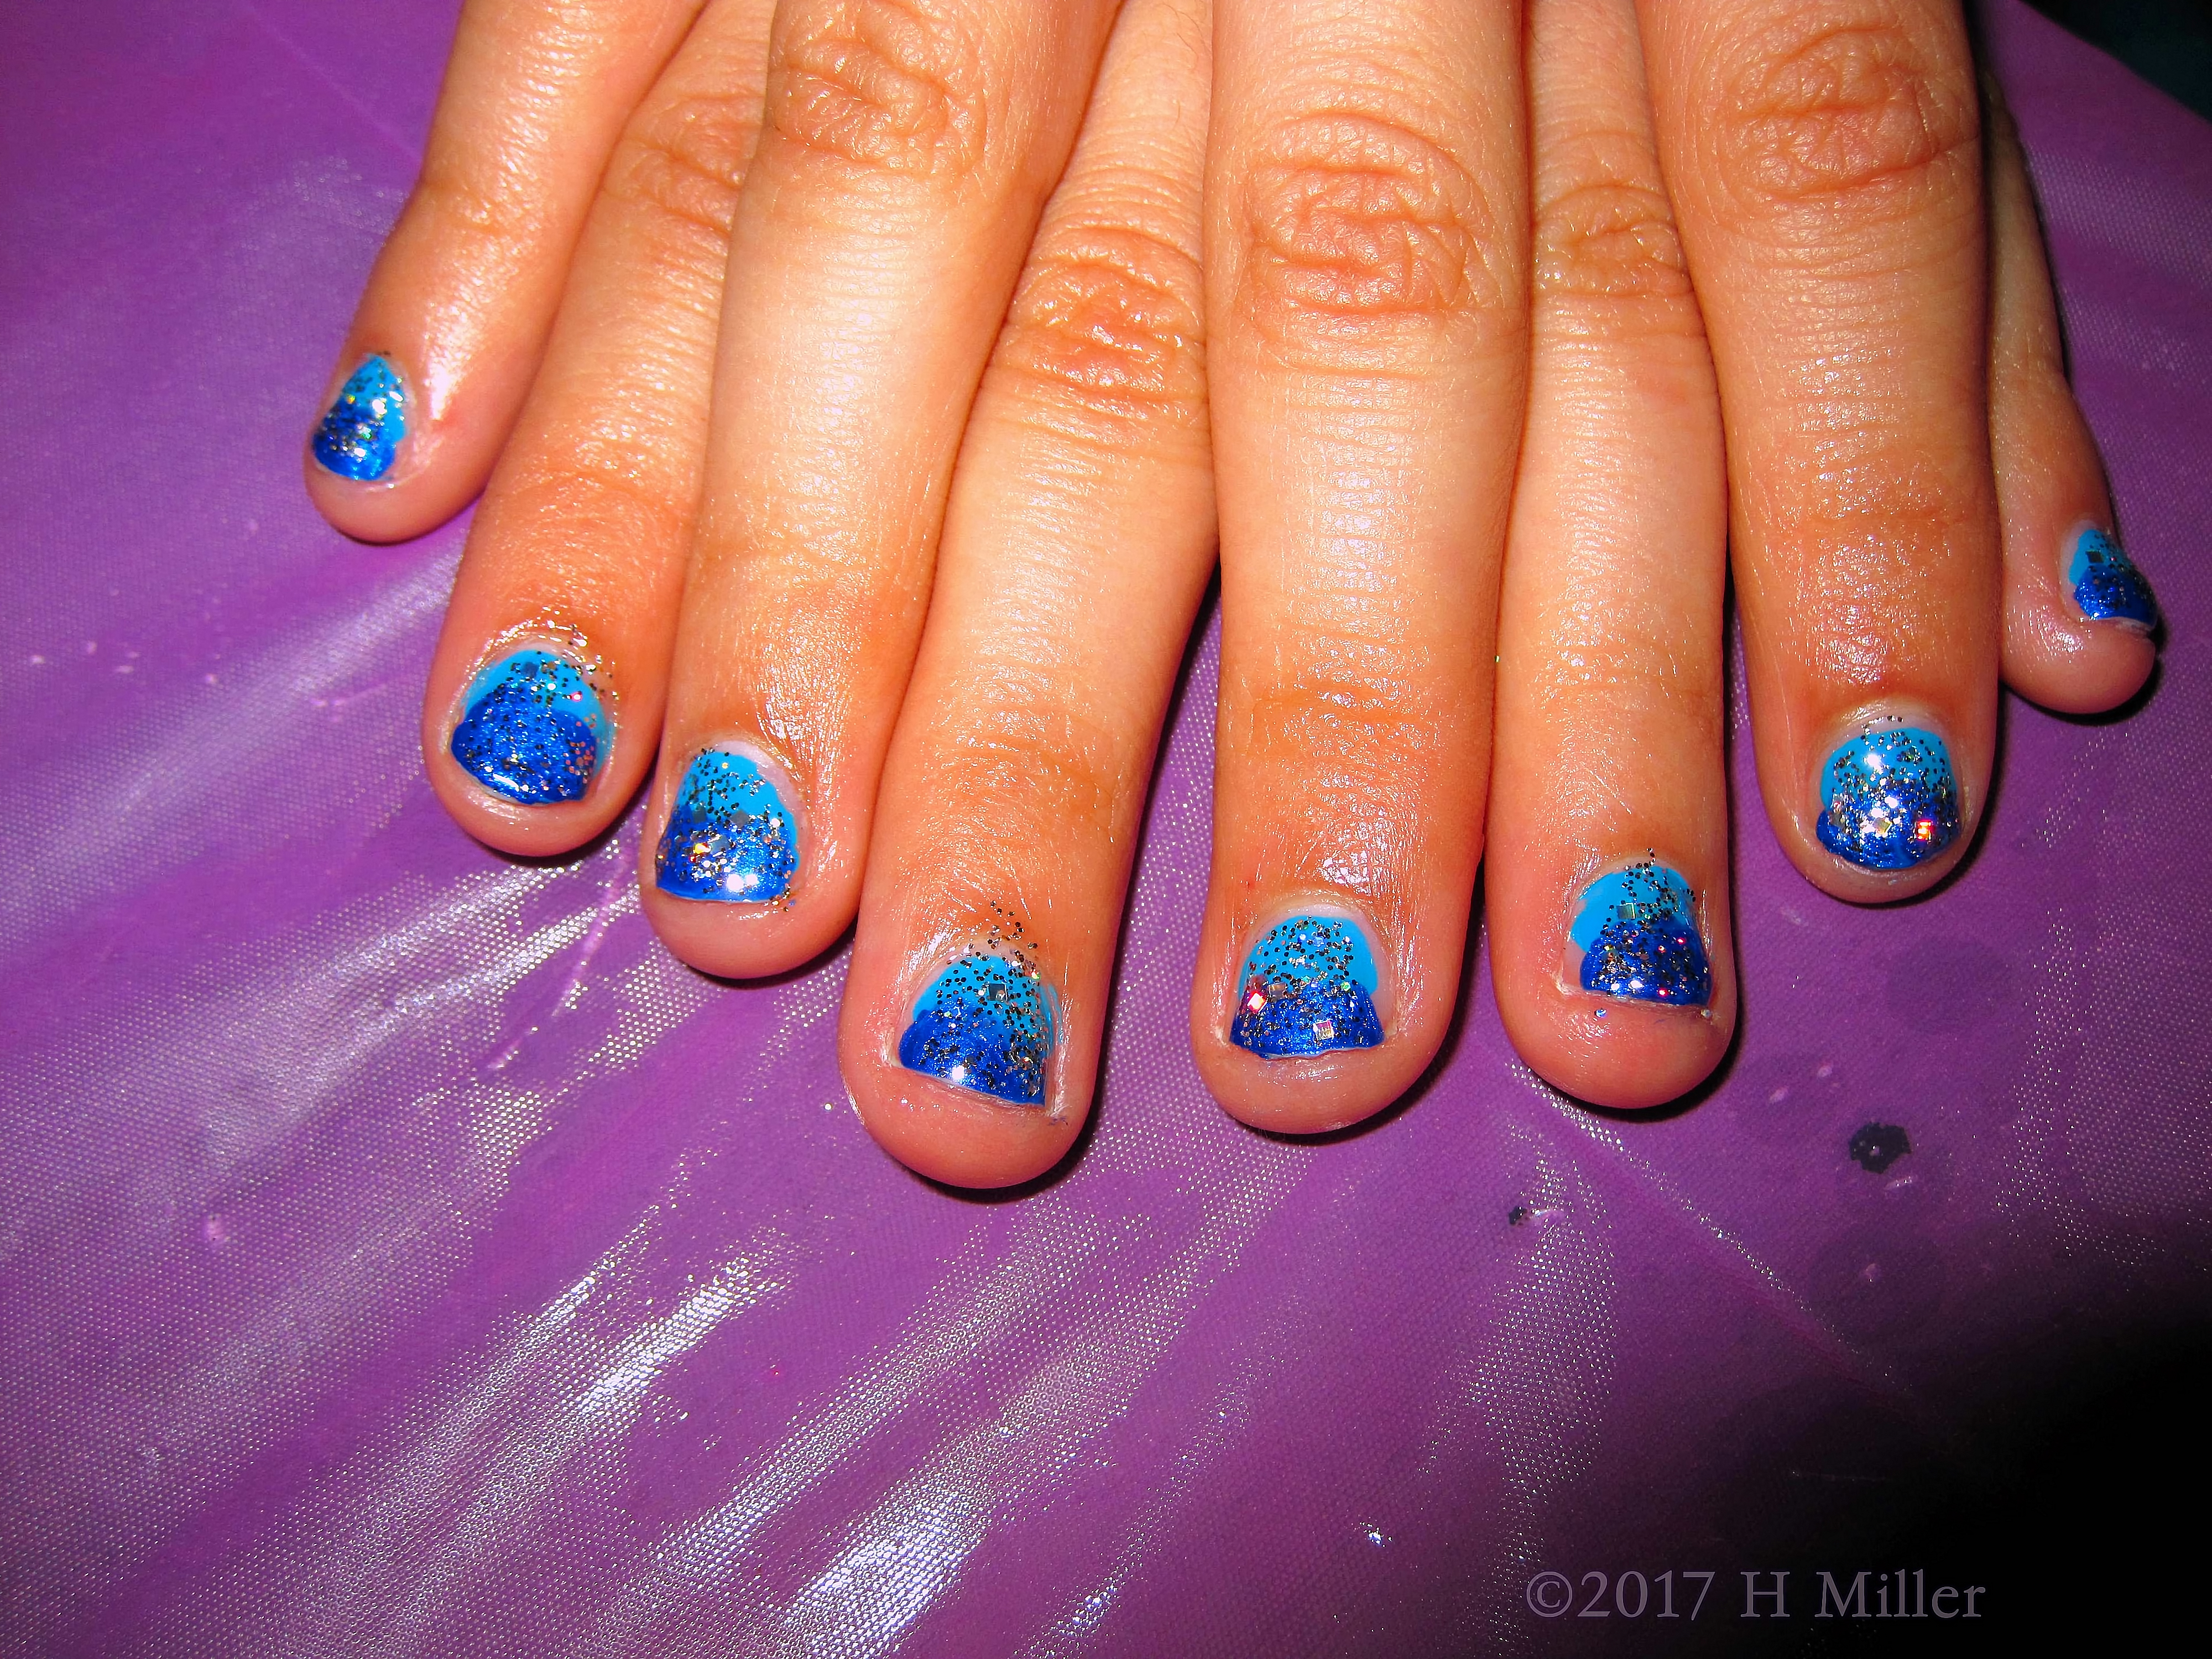 Shades Of Blue Ombre Nail Art With Glitter Overlay 4